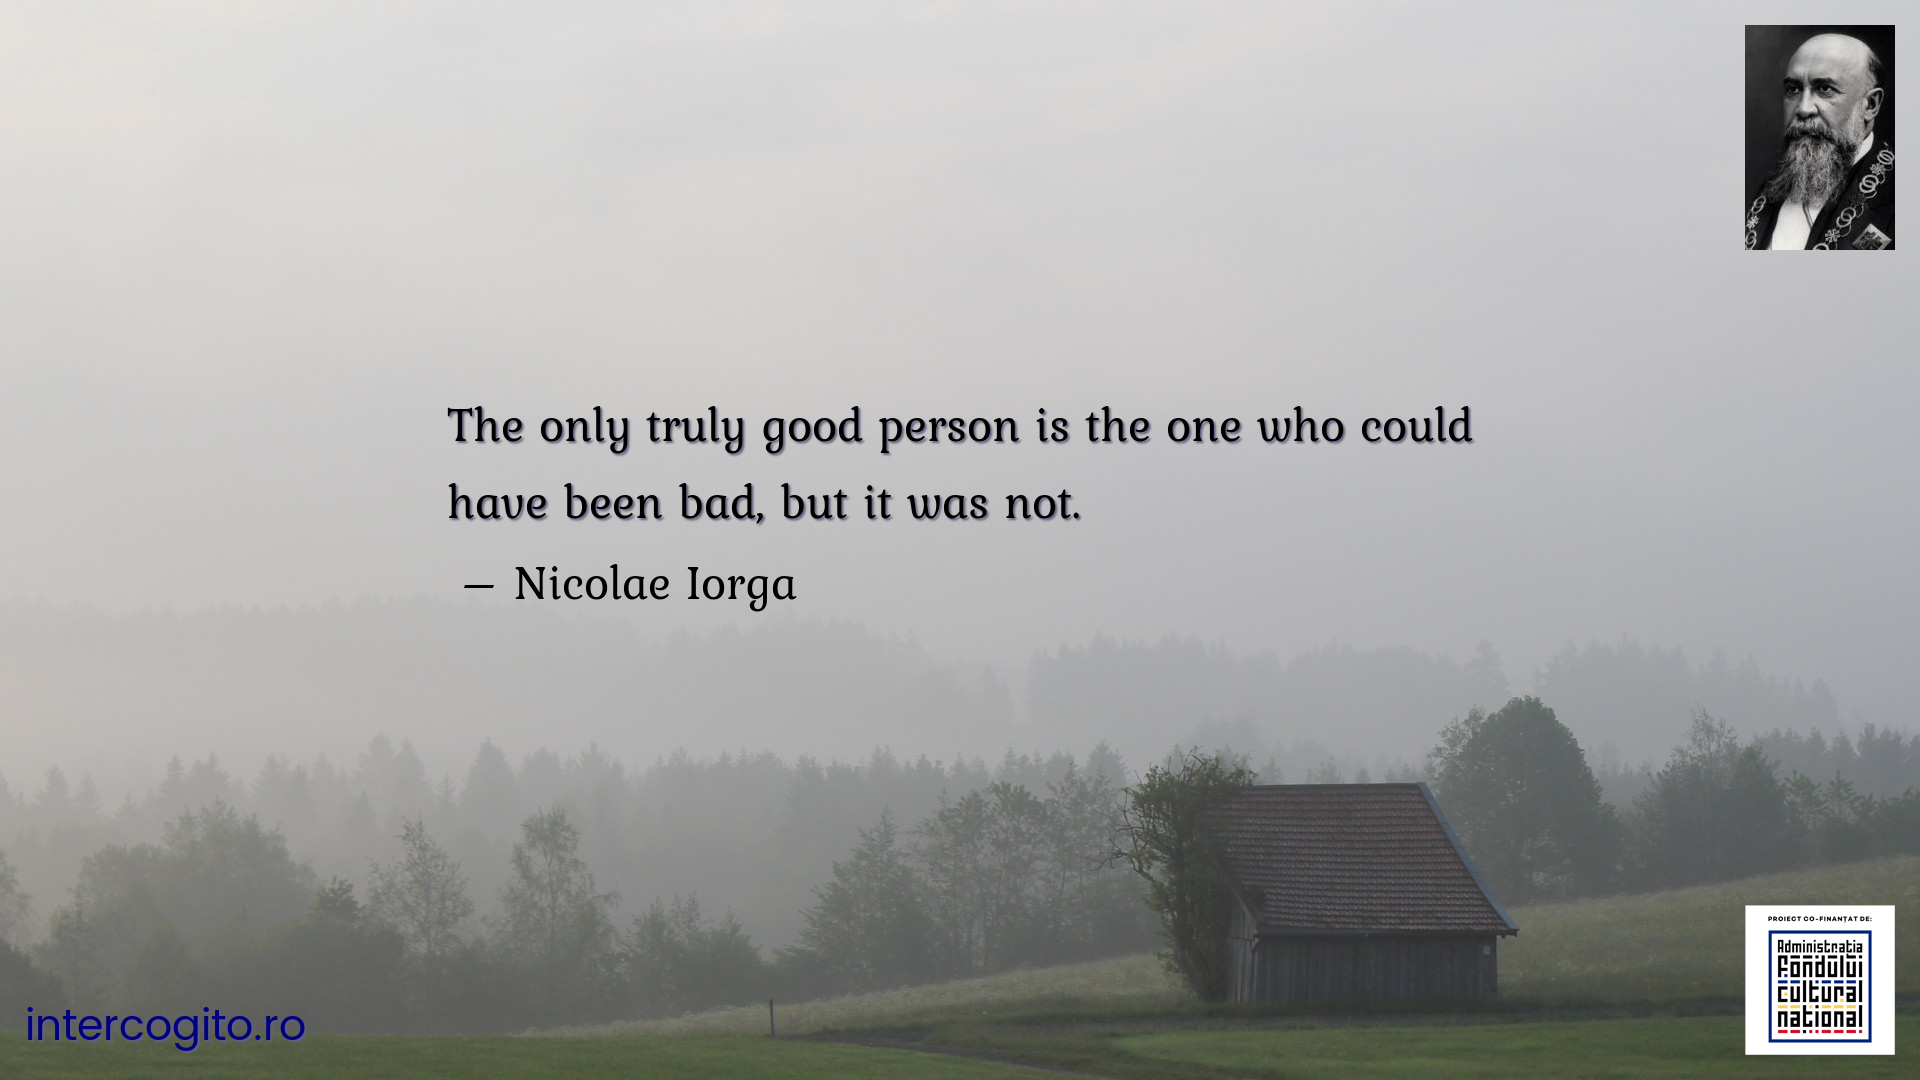 The only truly good person is the one who could have been bad, but it was not.